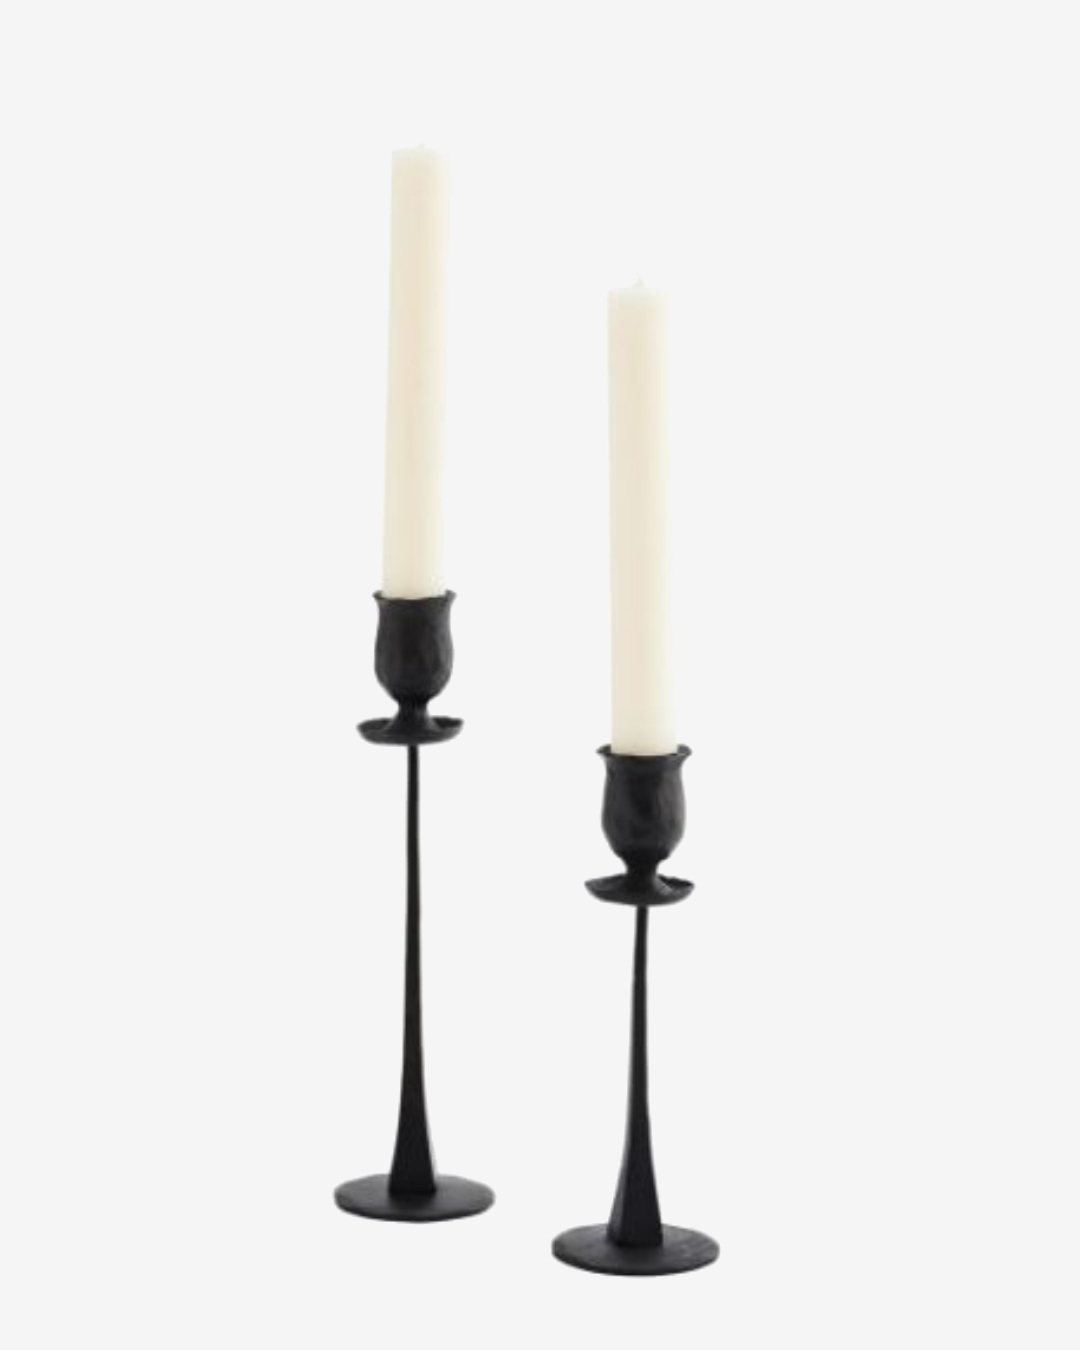 Two Black candle holders